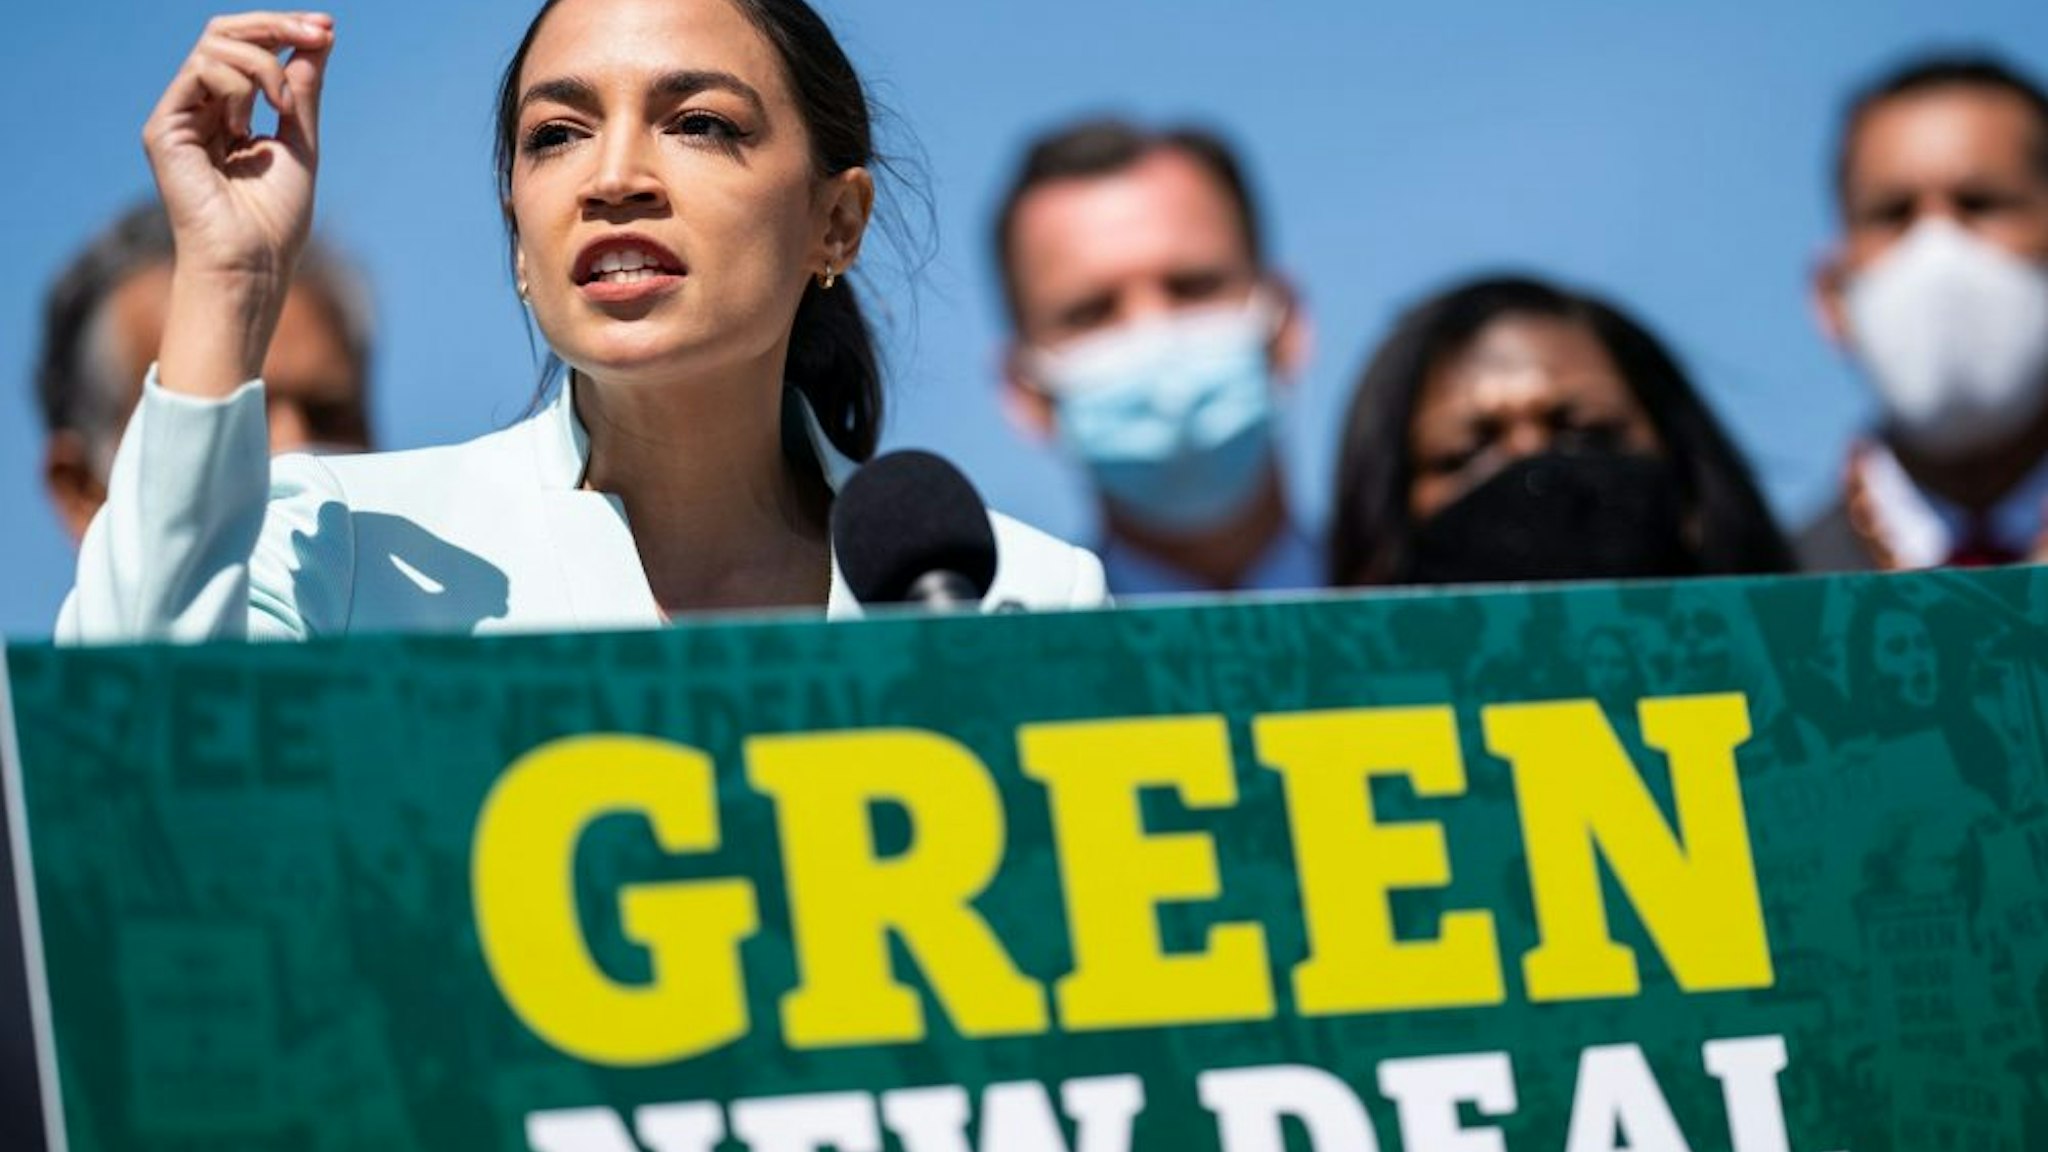 WASHINGTON, DC - APRIL 20: Rep. Alexandria Ocasio-Cortez (D-NY) speaks at a news conference to reintroduce the Green New Deal and introduce the Civilian Climate Corps Act at the Capitol Reflecting Pool near the West Front of the U.S. Capitol Building on Tuesday, April 20, 2021 in Washington, DC.